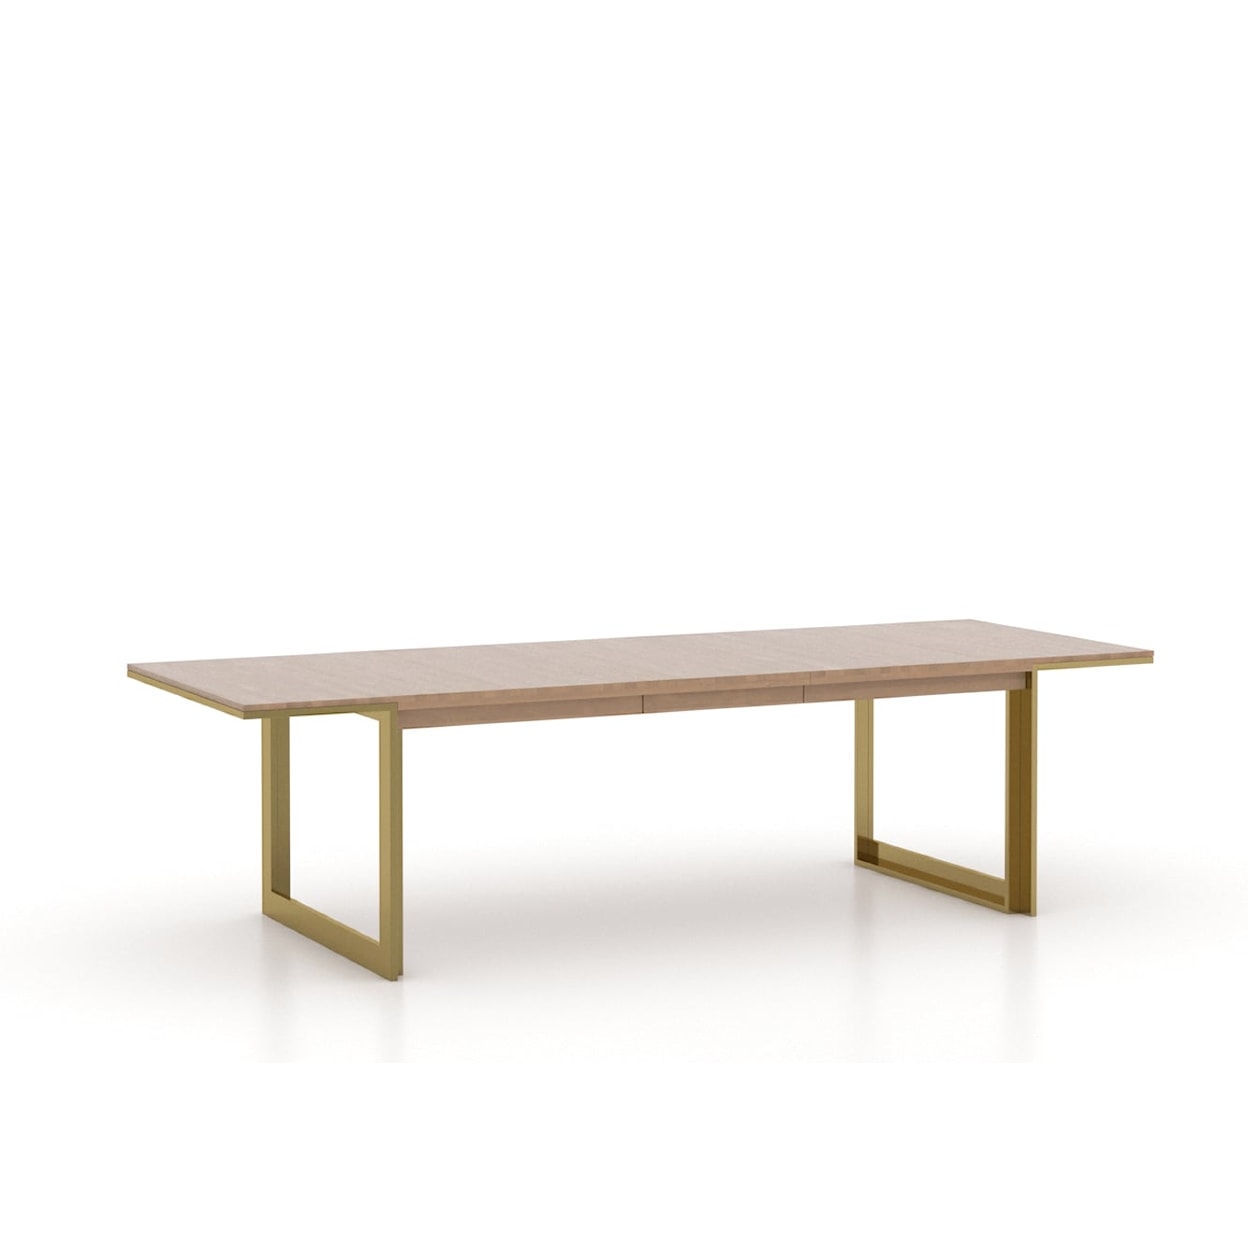 Canadel Modern Dining Table with Self-Storing Leaf